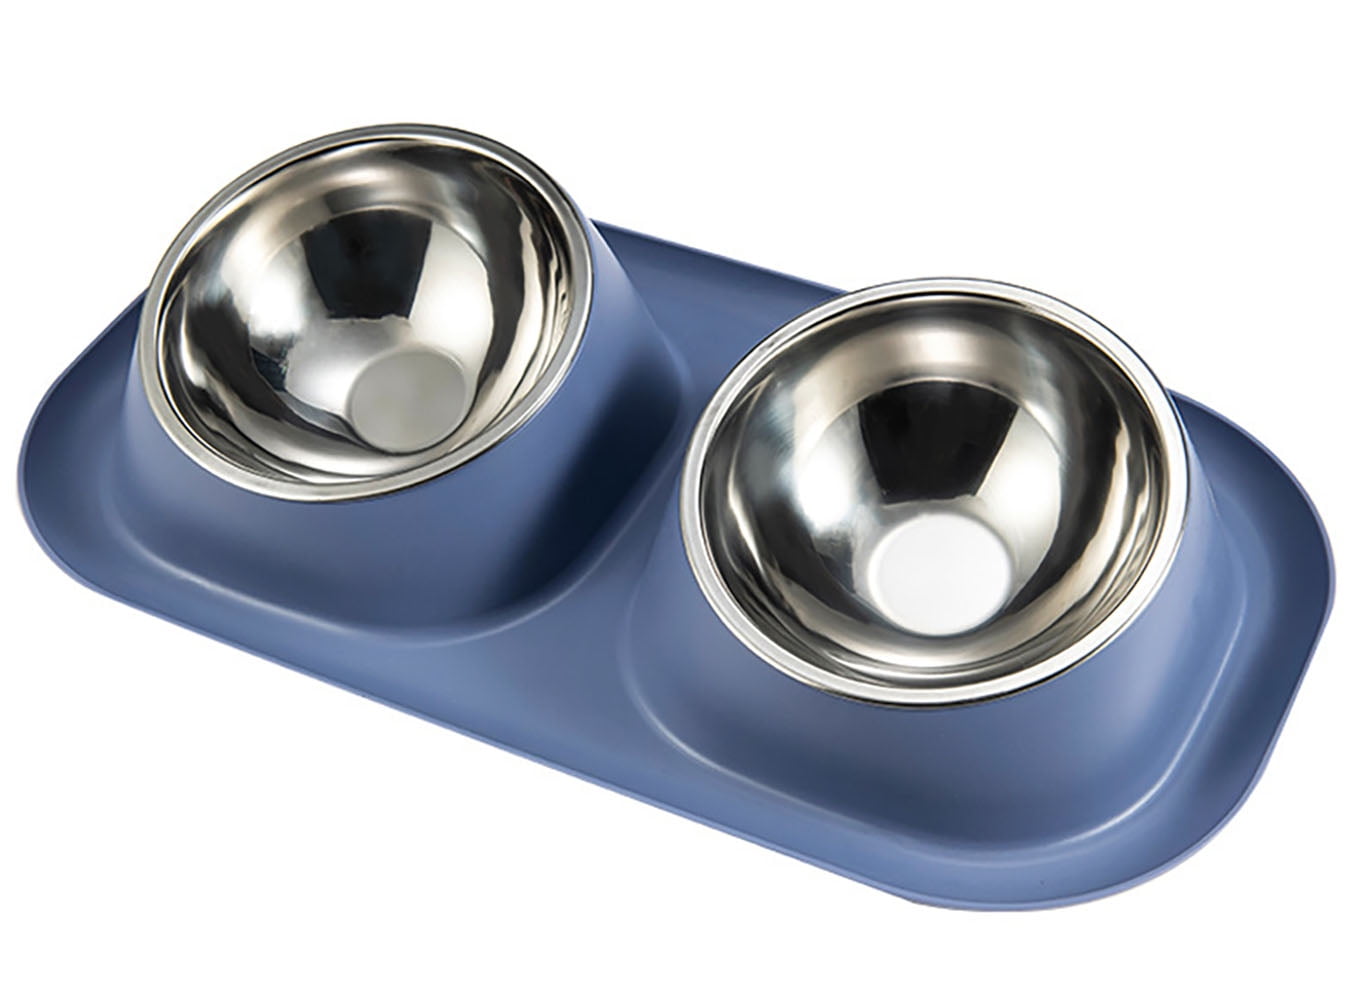 Tails 16cm Stainless Steel Pet Bowl - Assorted*